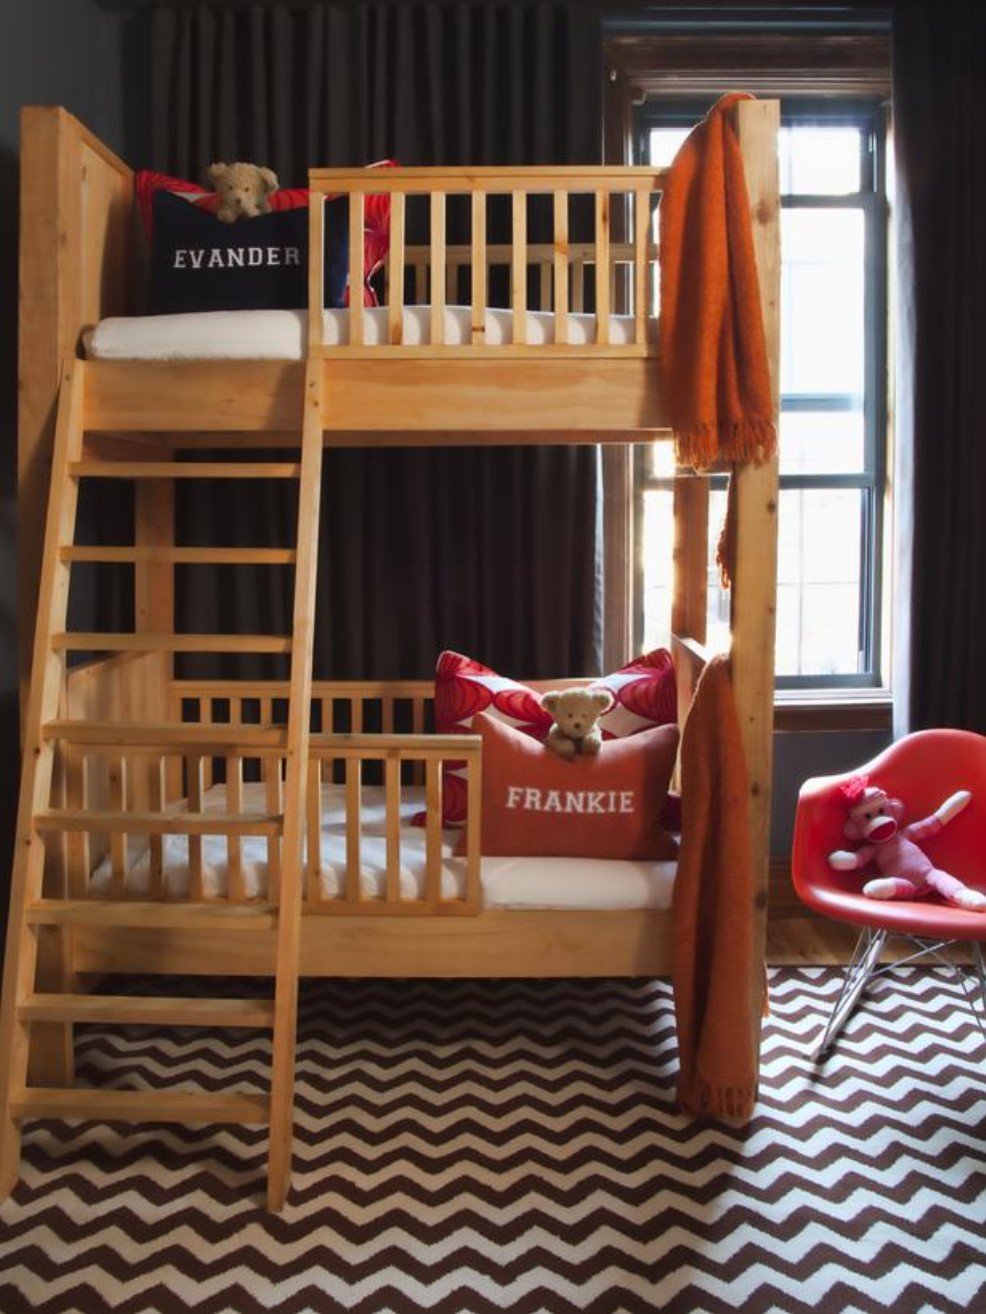 Kids Room 2 Fascinating Kids Room Furniture For 2 Boys Design Ideas With Rustic Wooden Bunk Beds Design And Modern Molded Plastic Chairs Idea Also Classic Black Window Curtains Plus Cute Teddy Bear Doll Furniture Composing The Special Type Of Kids Room Furniture